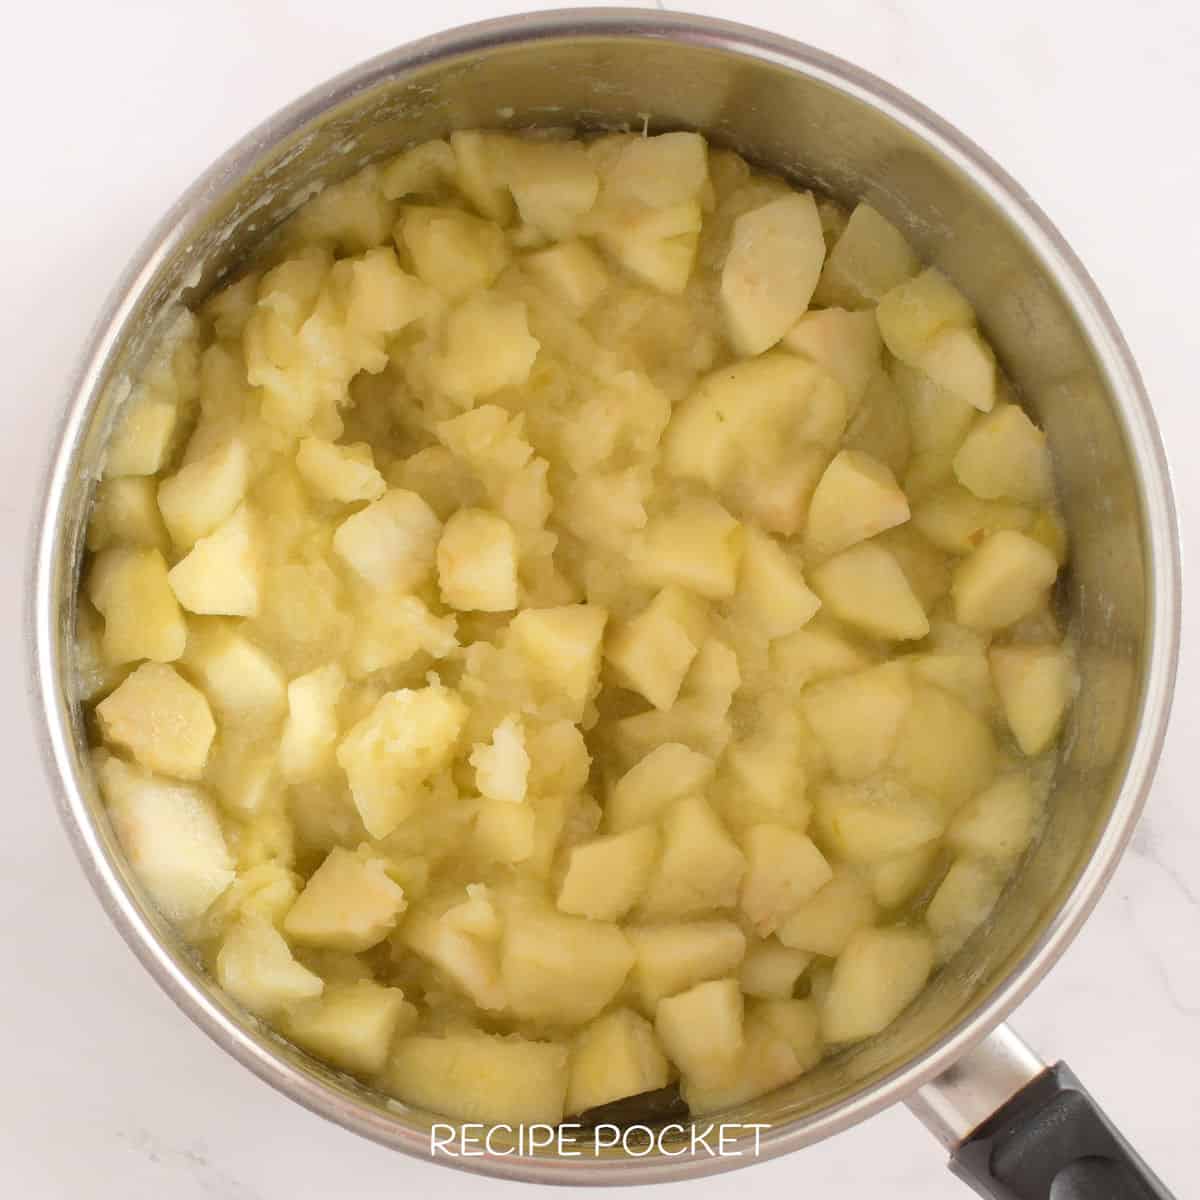 Cooked apple in a saucepan.